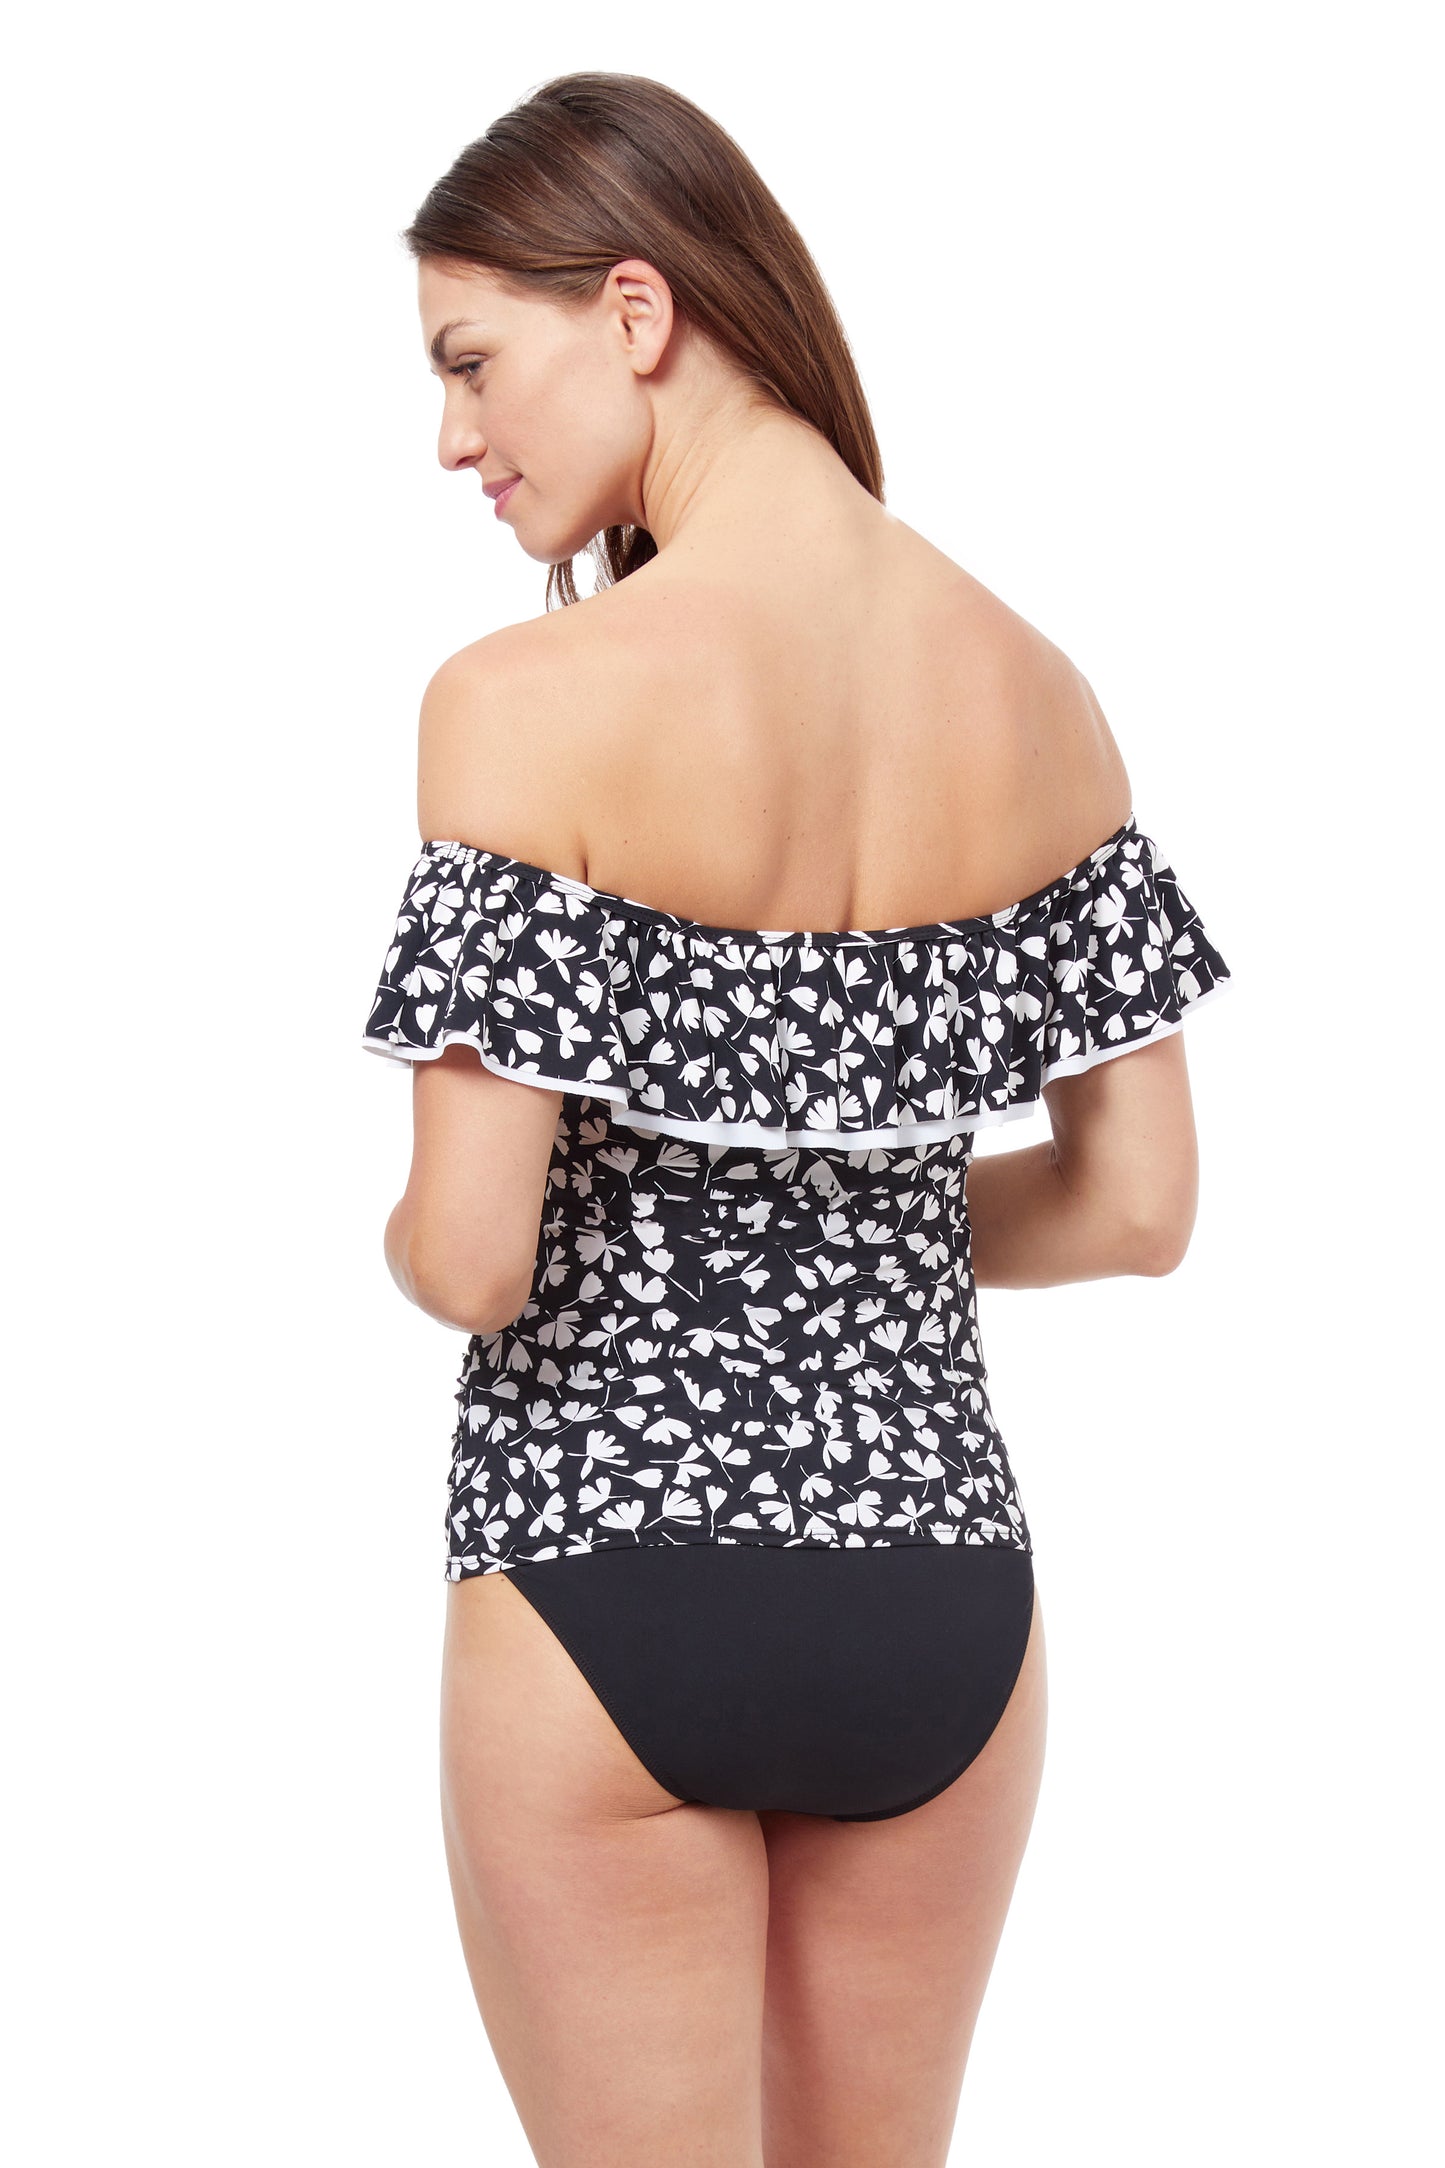 OFF THE SHOULDER TANKINI TOP